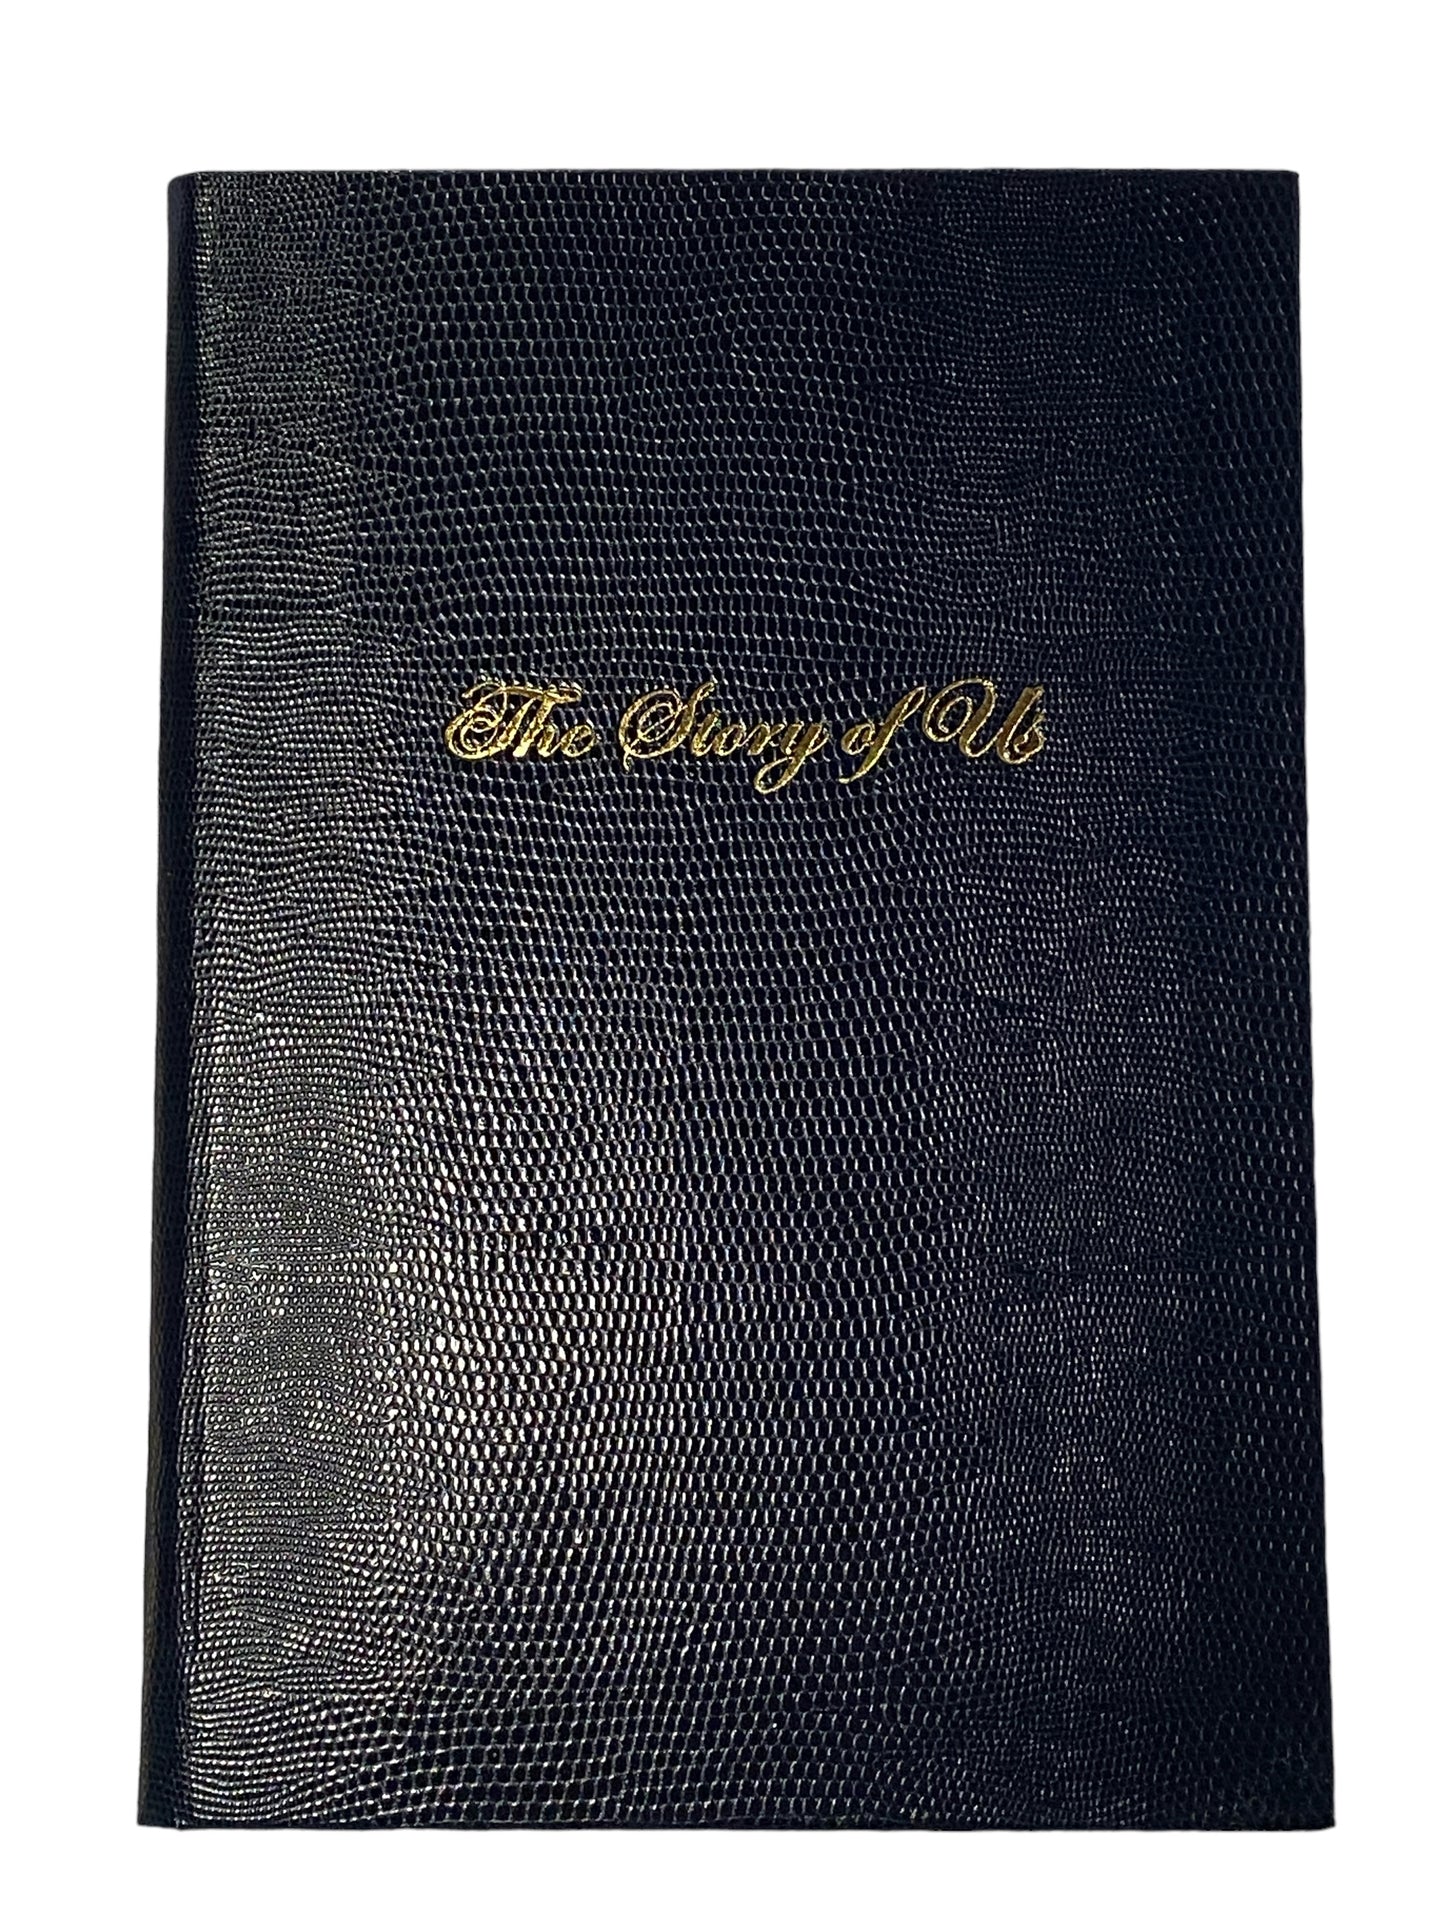 The Story of Us Notebook